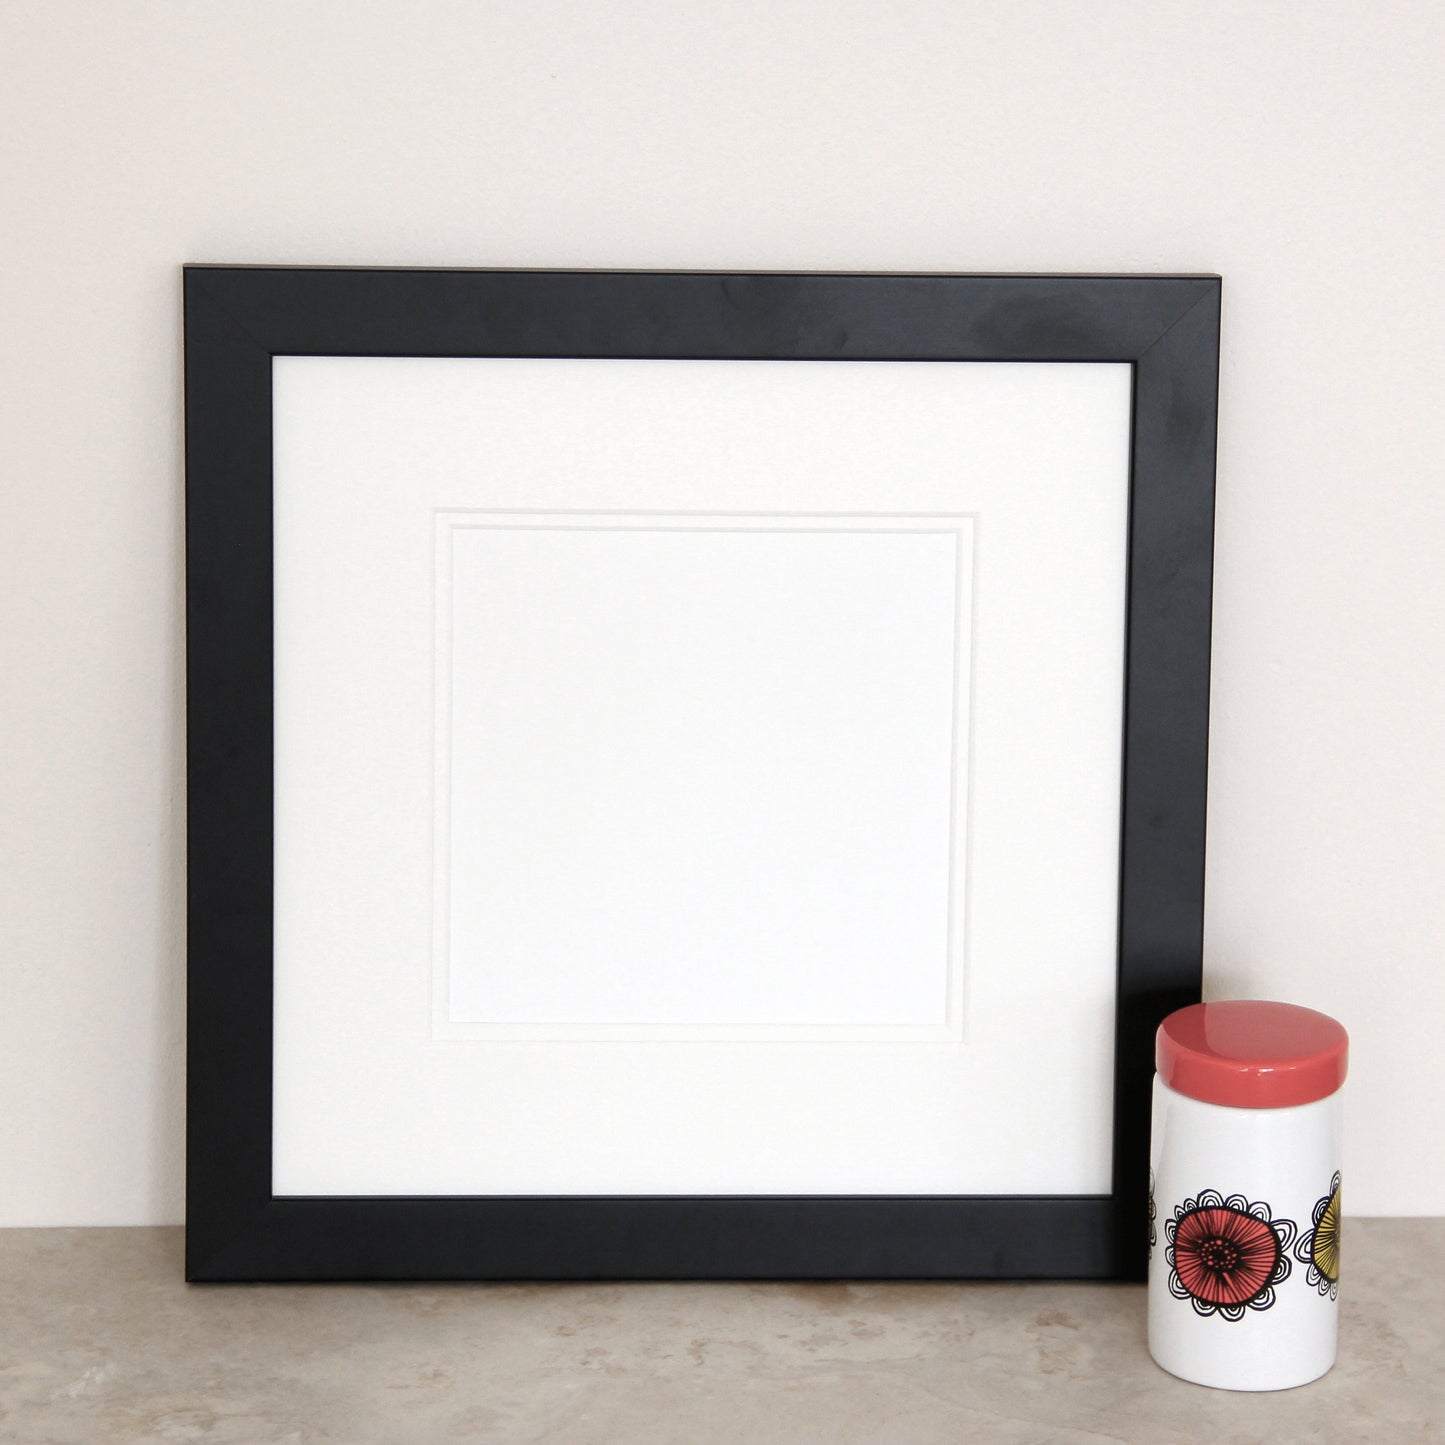 10x10 inch Black Frame with Mount/Matt included (to fit 6x6" Lisa Marie Designs Cards)